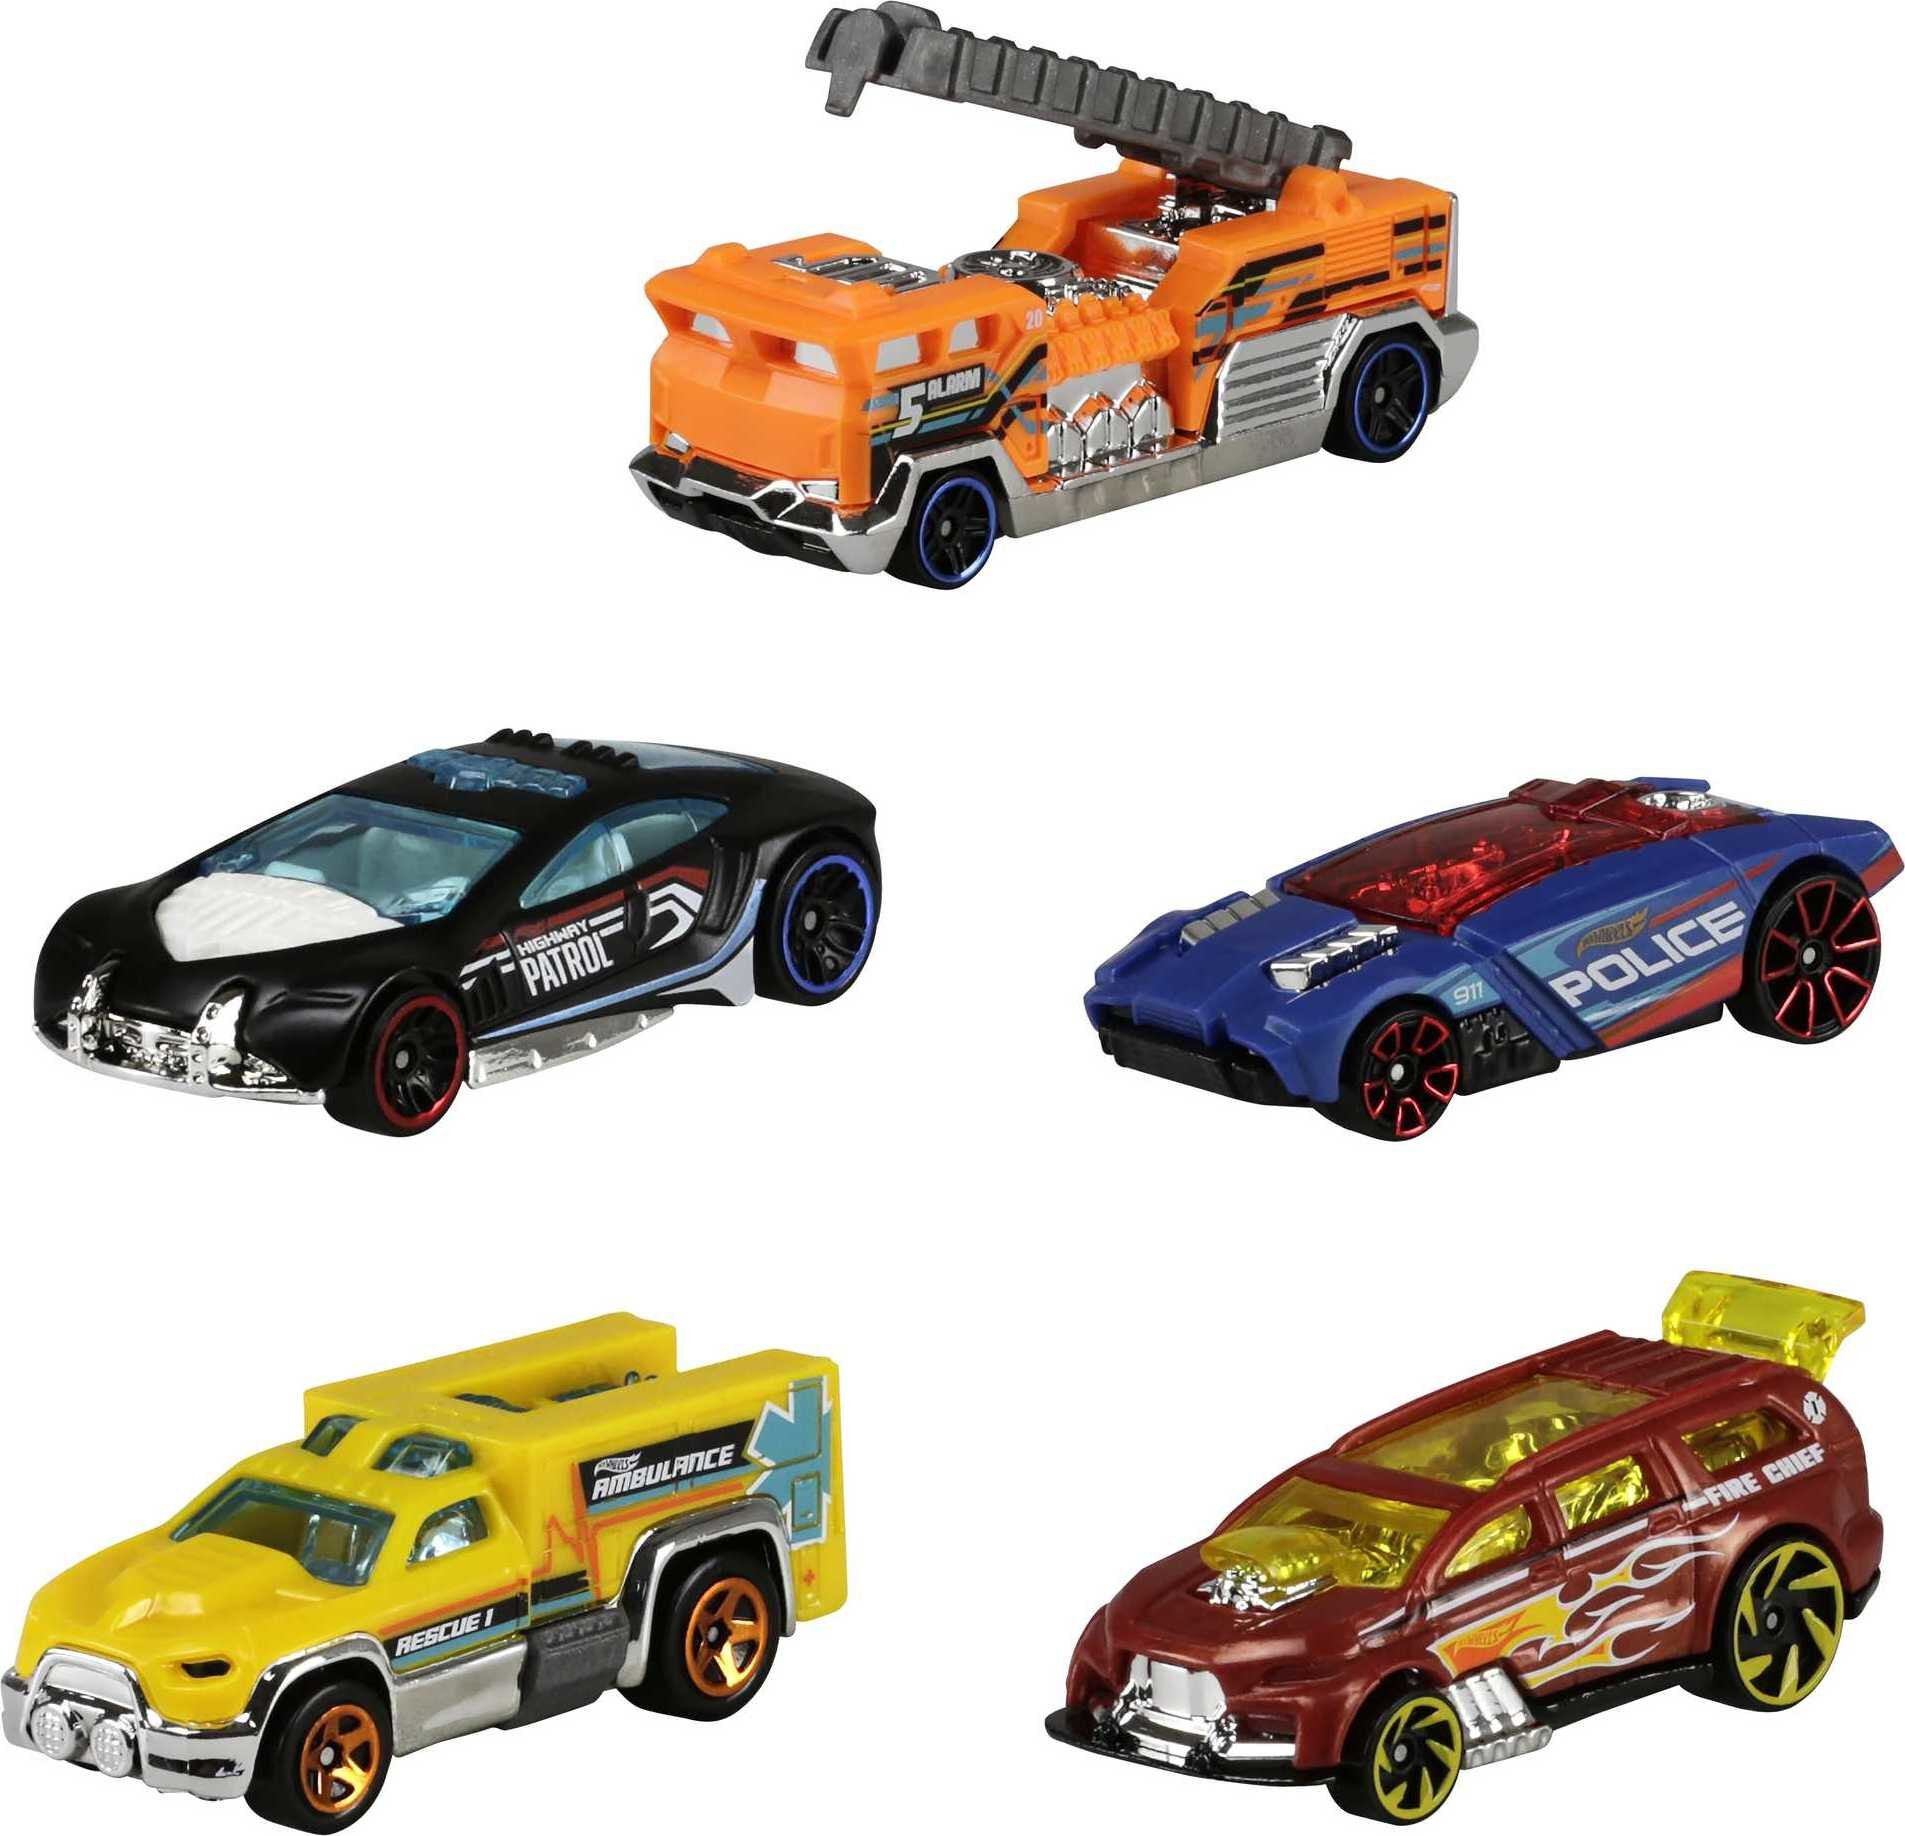 Hot Wheels Cars, 5-Pack of Die-Cast Toy Cars or Trucks in 1:64 Scale (Styles May Vary) - image 7 of 7